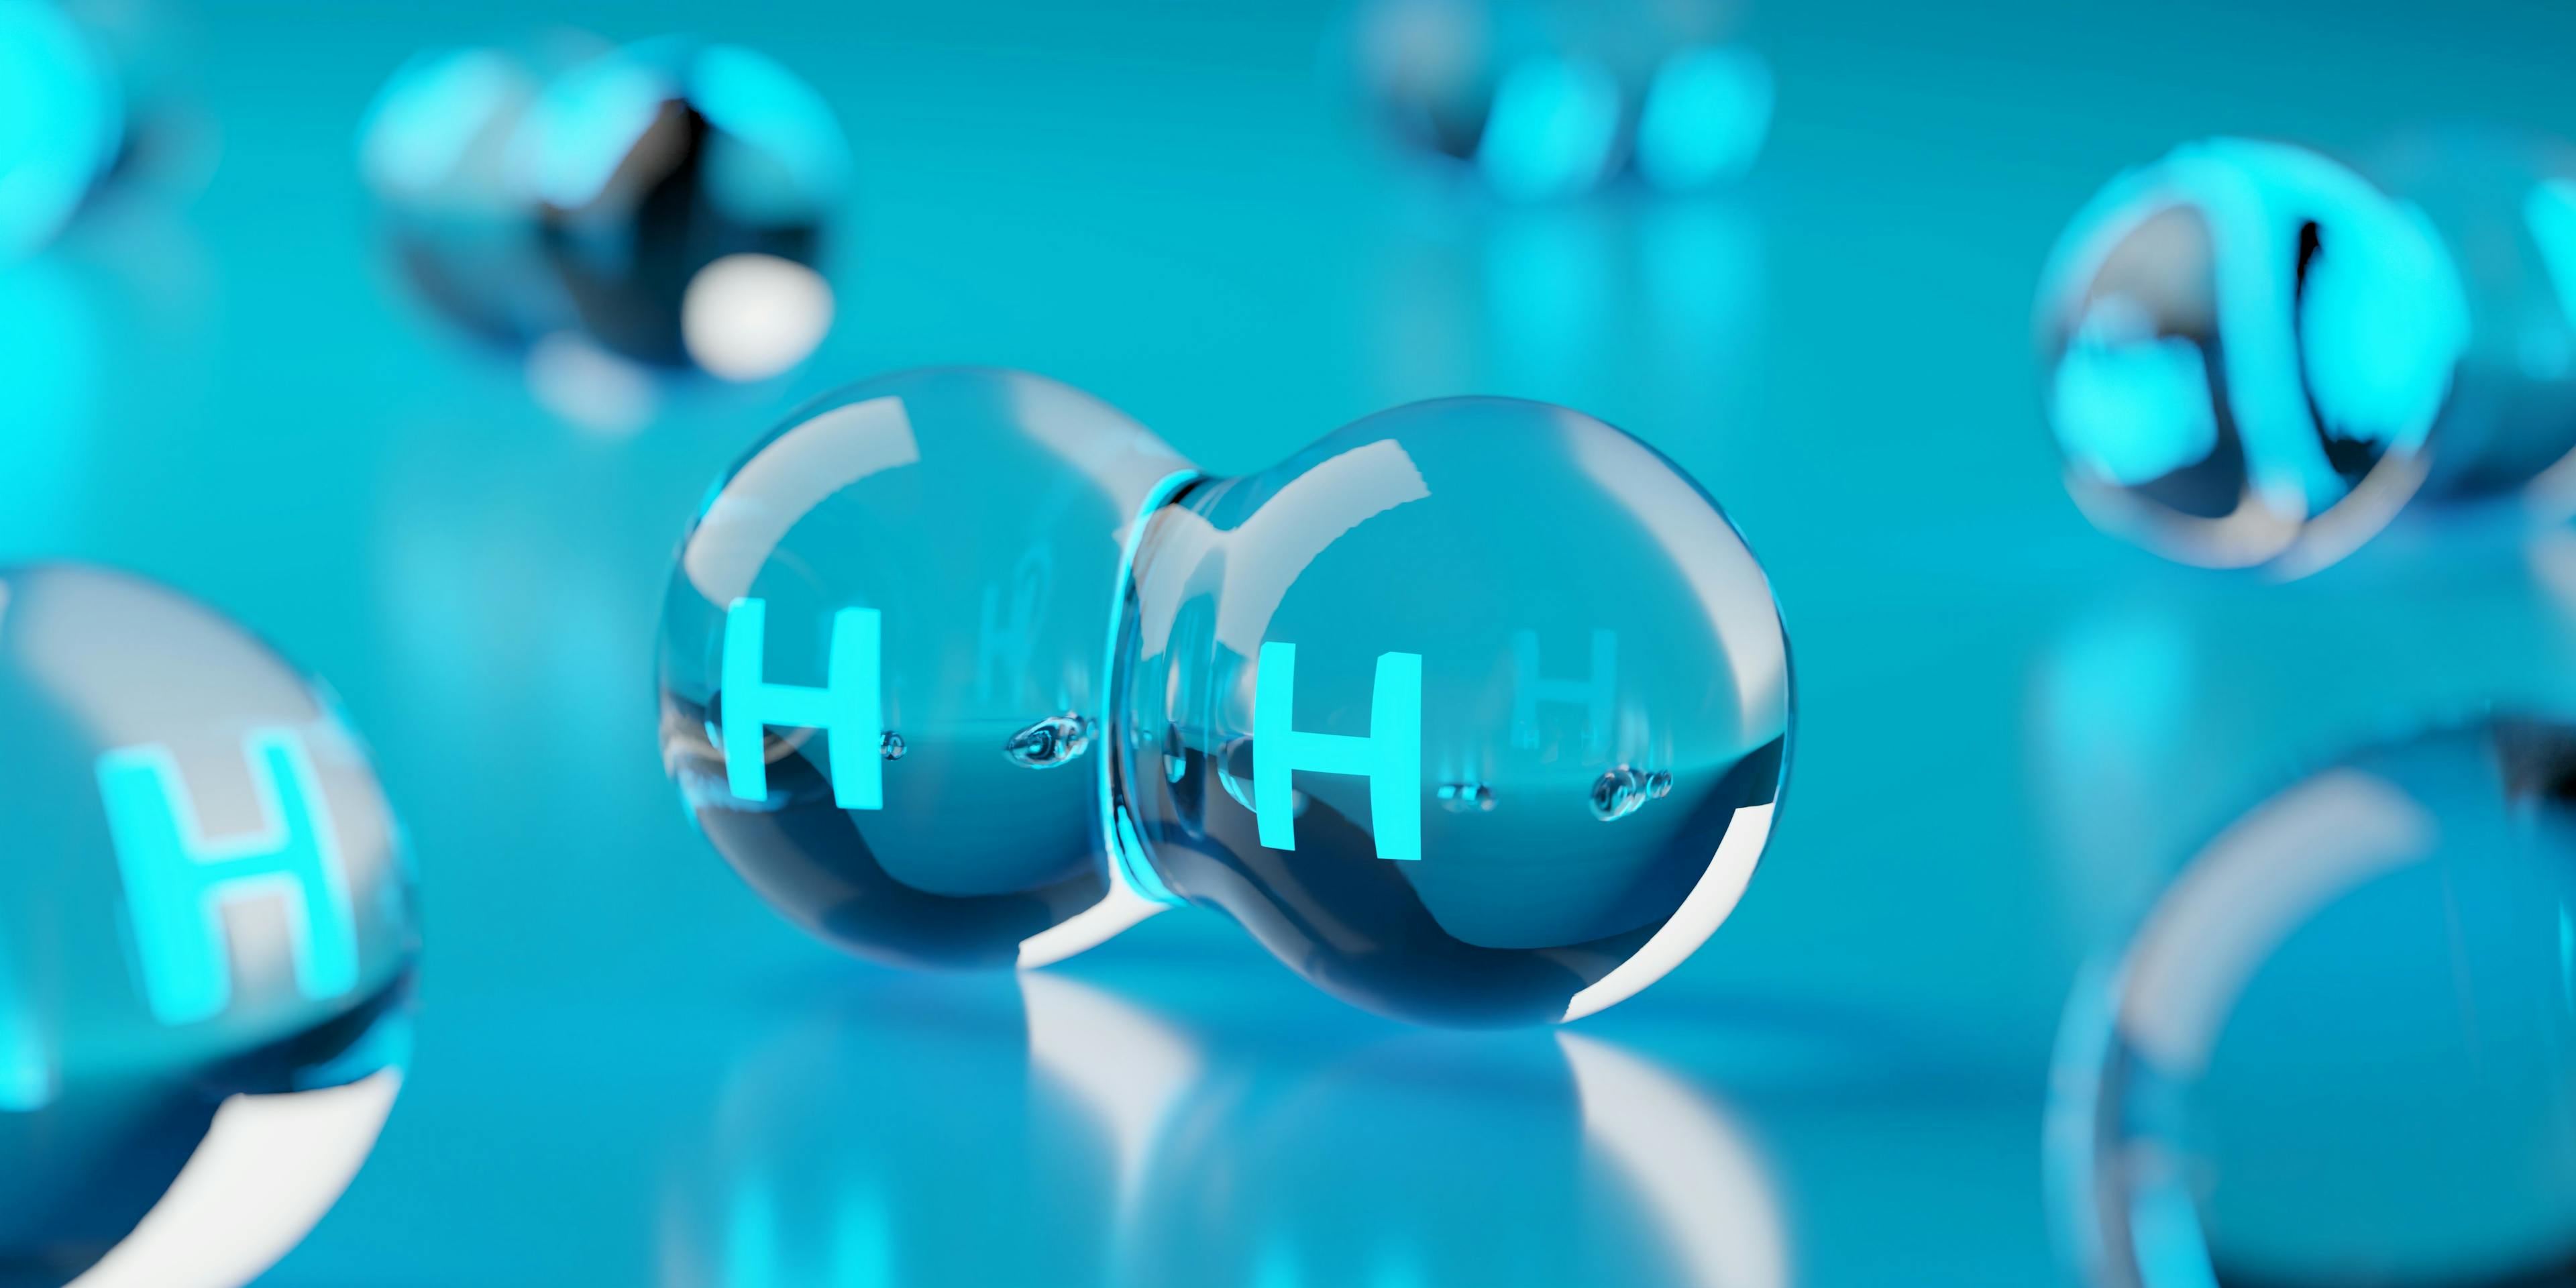 Abstract transparent hydrogen H2 molecules on blue background, clean energy or chemistry concept | Image Credit: © Shawn Hempel - stock.adobe.com. 